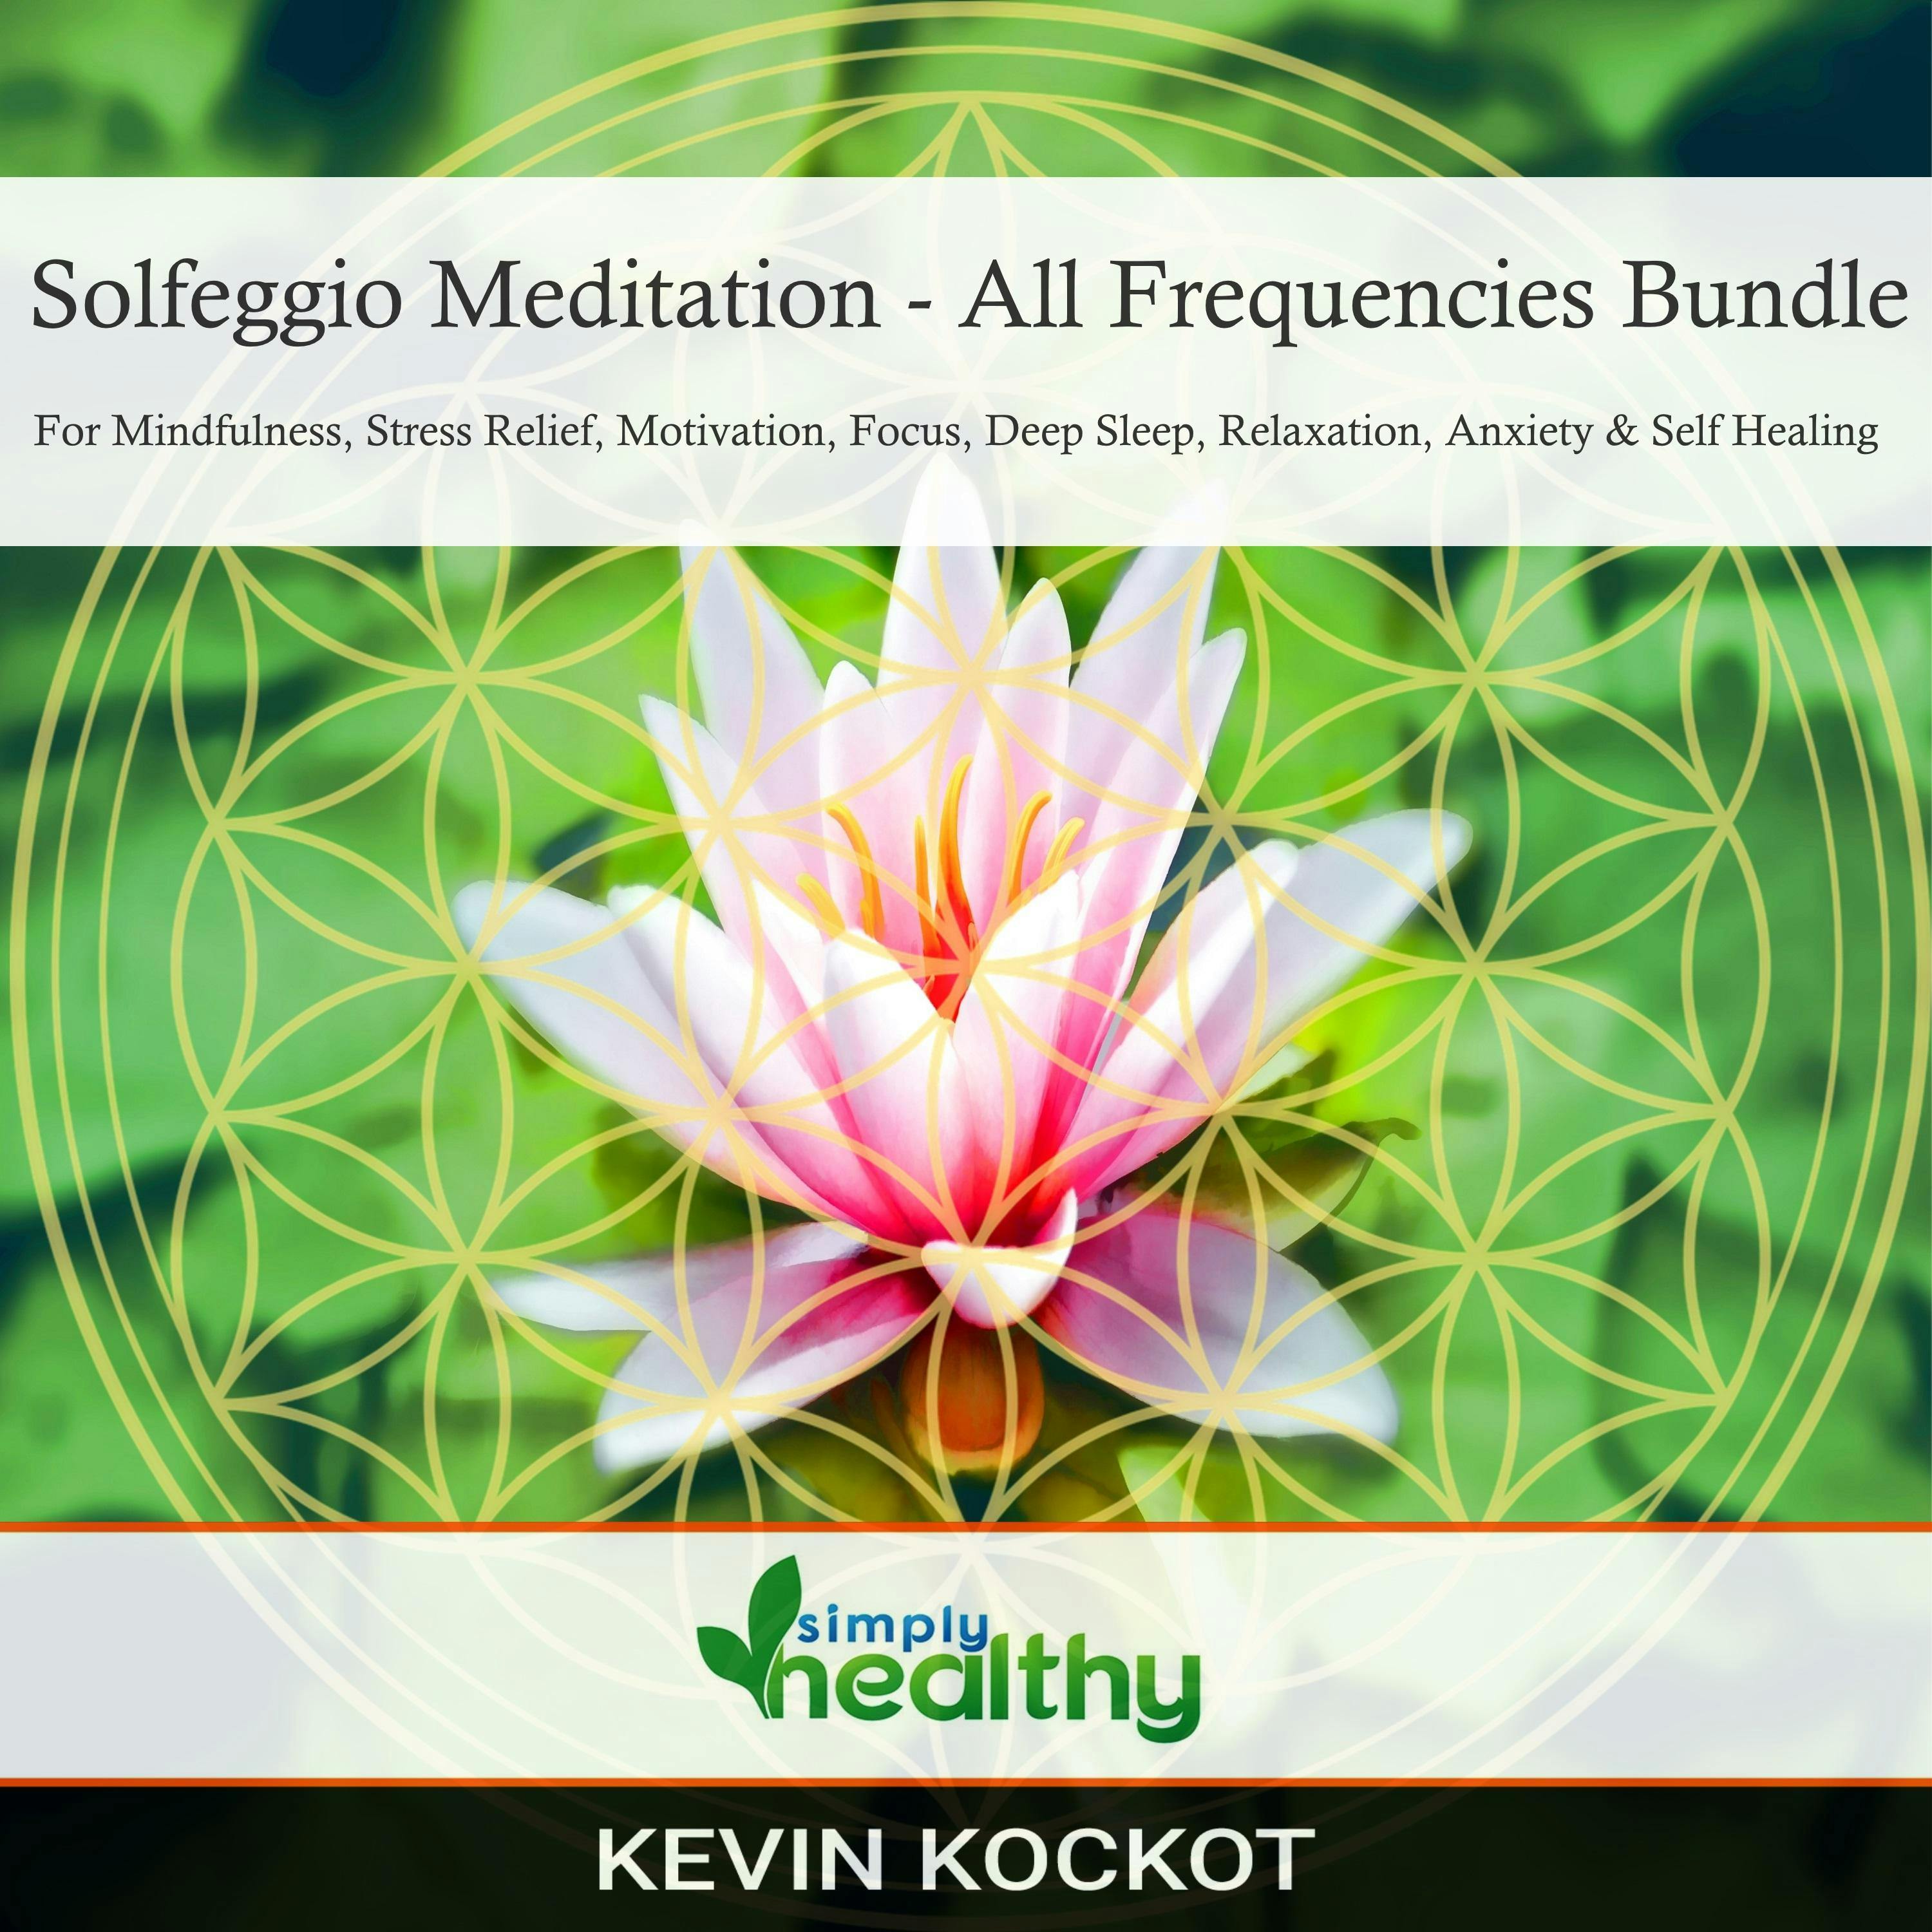 Solfeggio Meditation - All Frequencies Bundle: For Mindfulness, Stress Relief, Motivation, Focus, Deep Sleep, Relaxation, Anxiety, & Self Healing - undefined